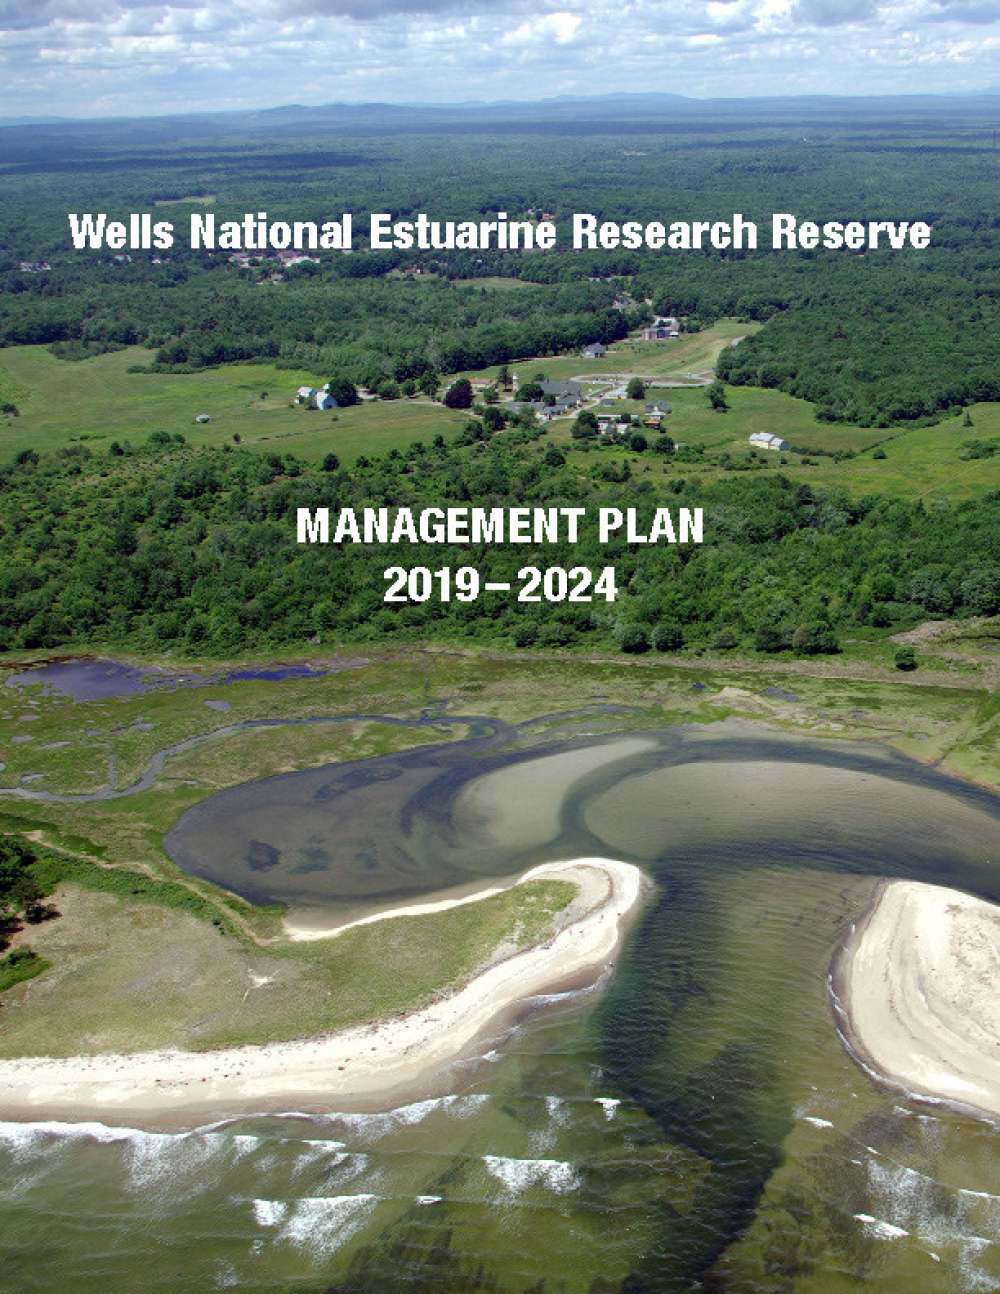 Cover image for Wells National Estuarine Research Reserve Management Plan 2019 to 2024, showing aerial view of Little River mouth and Laudholm campus.